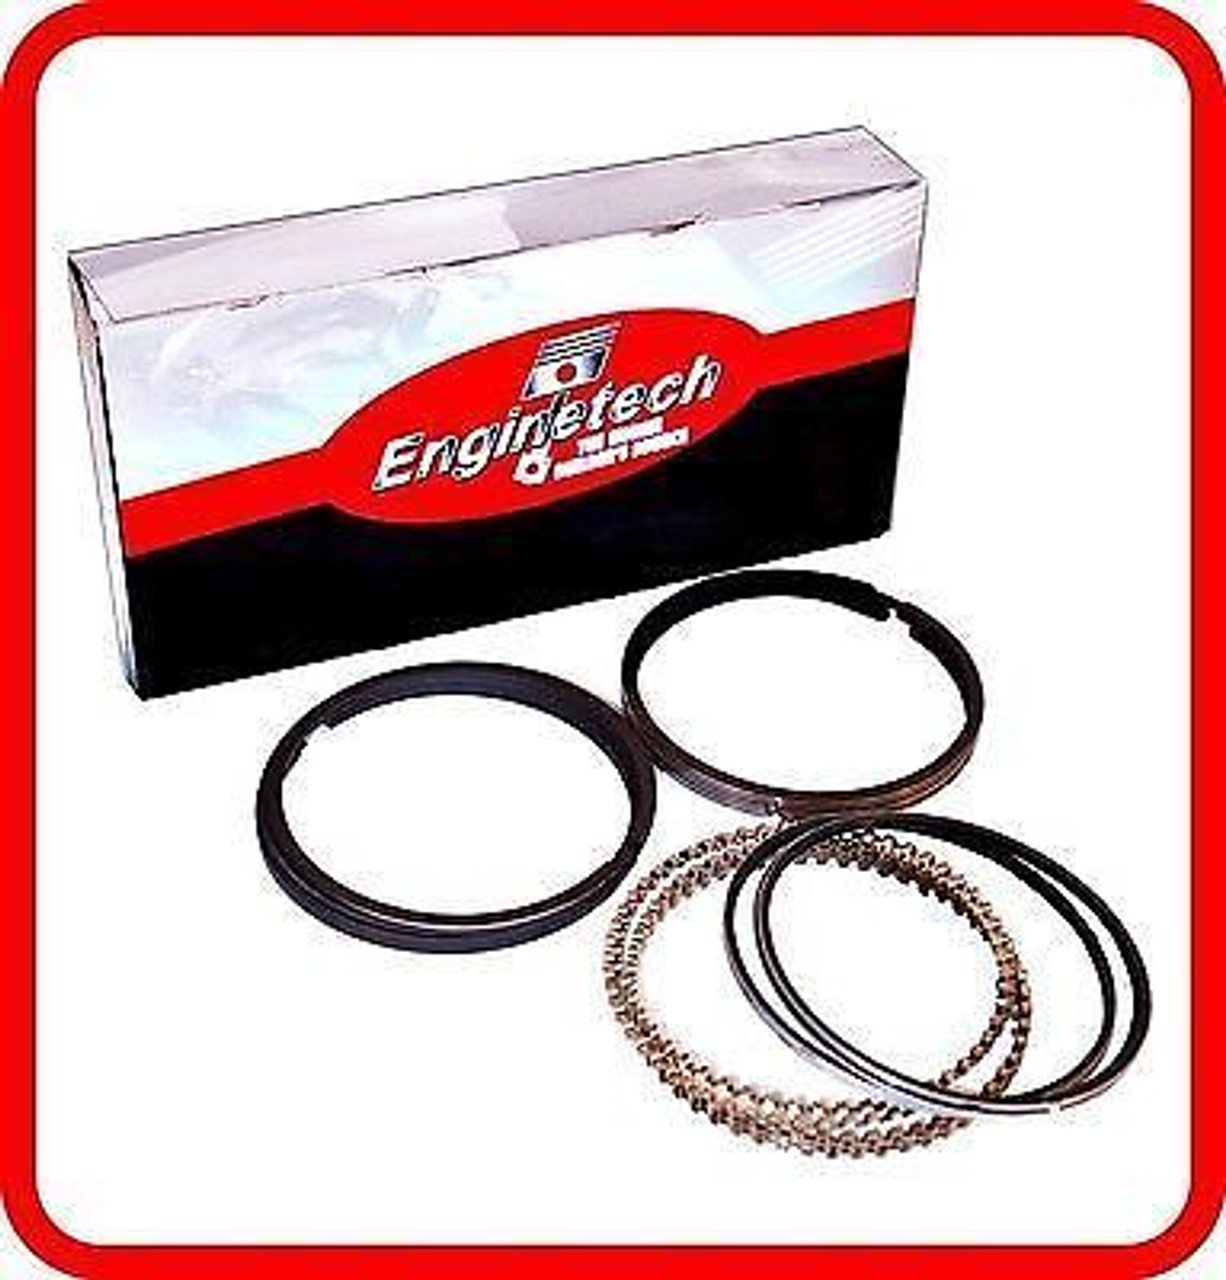 Piston Ring Set - 2009 Cadillac STS 3.6L (S94112.H76)